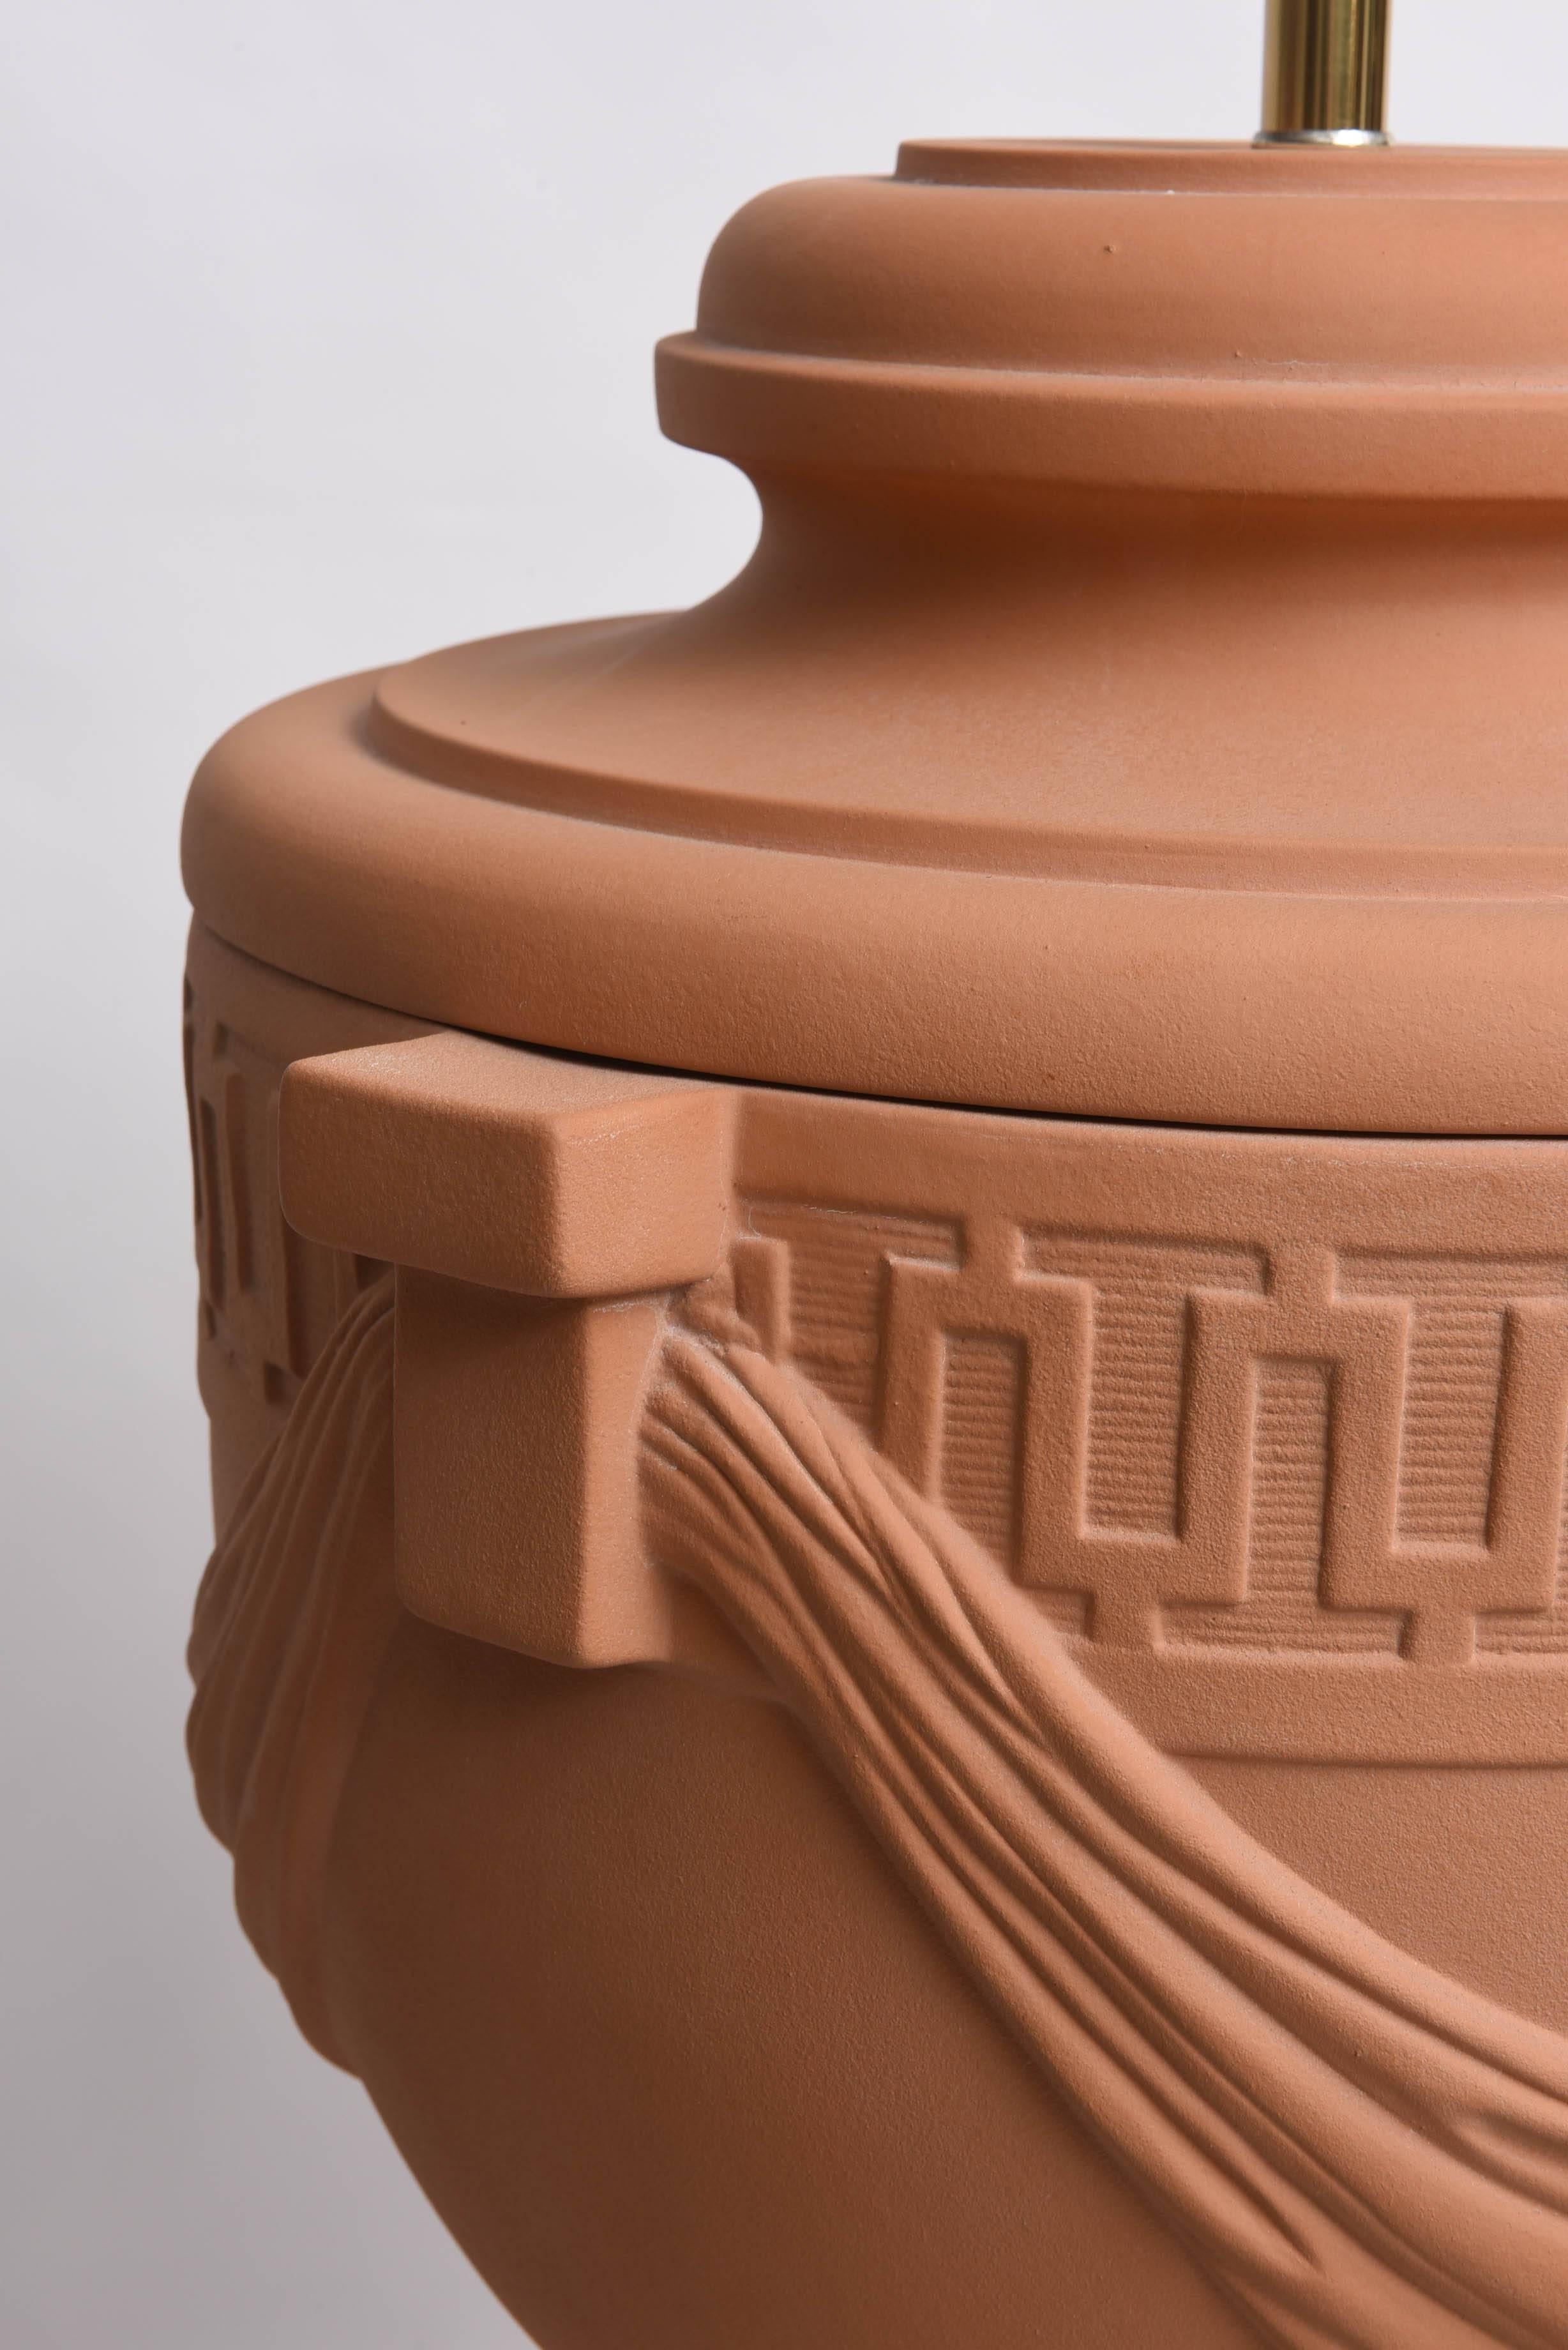 Neoclassical Revival Pair of Large-Scaled Neoclassical Style Terra Cotta, Urn-Shaped Table Lamps